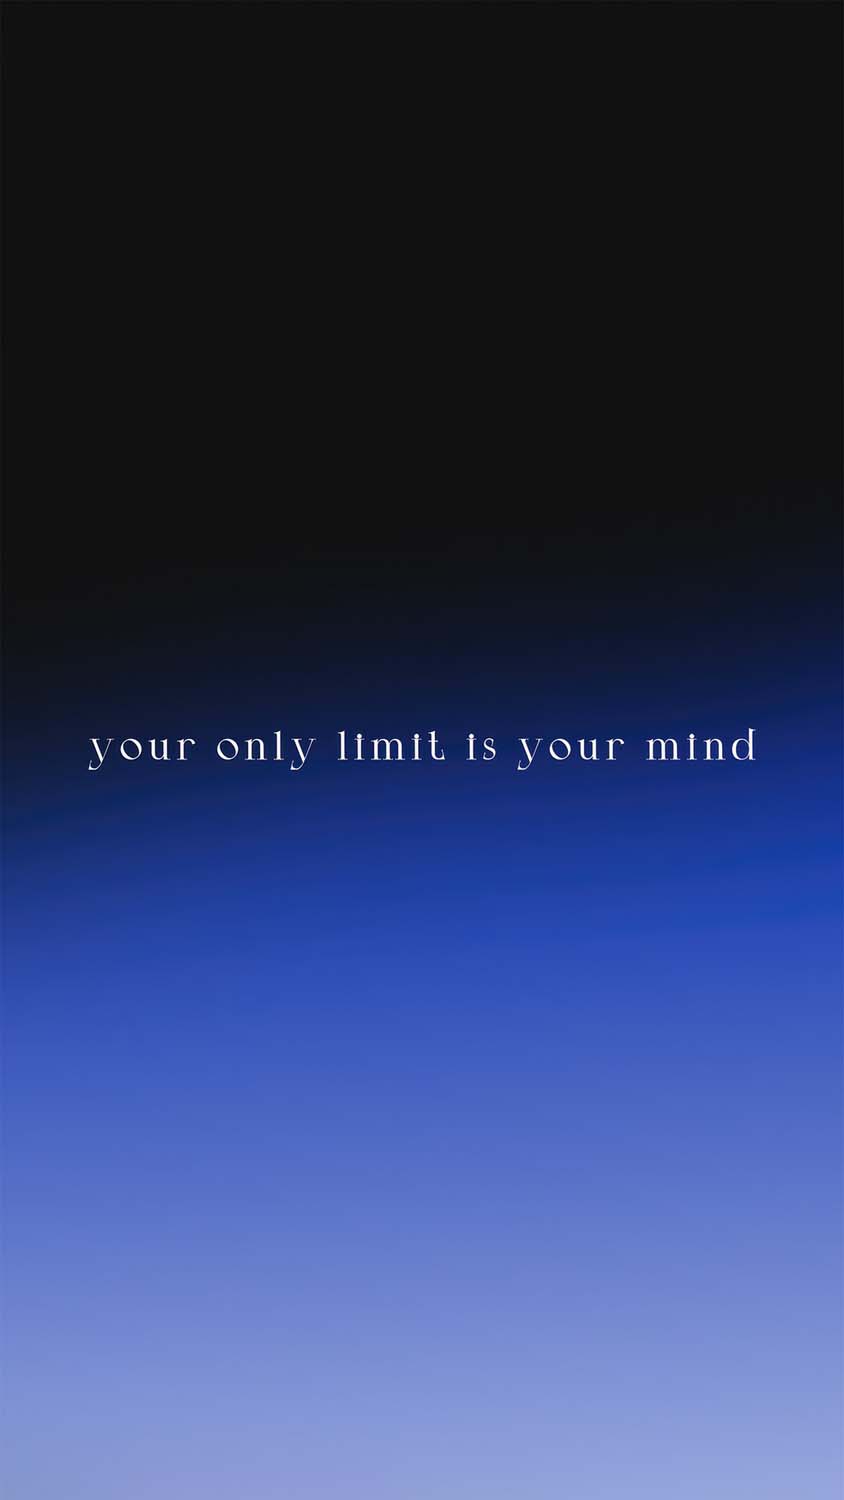 Your only limit is your Mind iPhone Wallpaper 4K